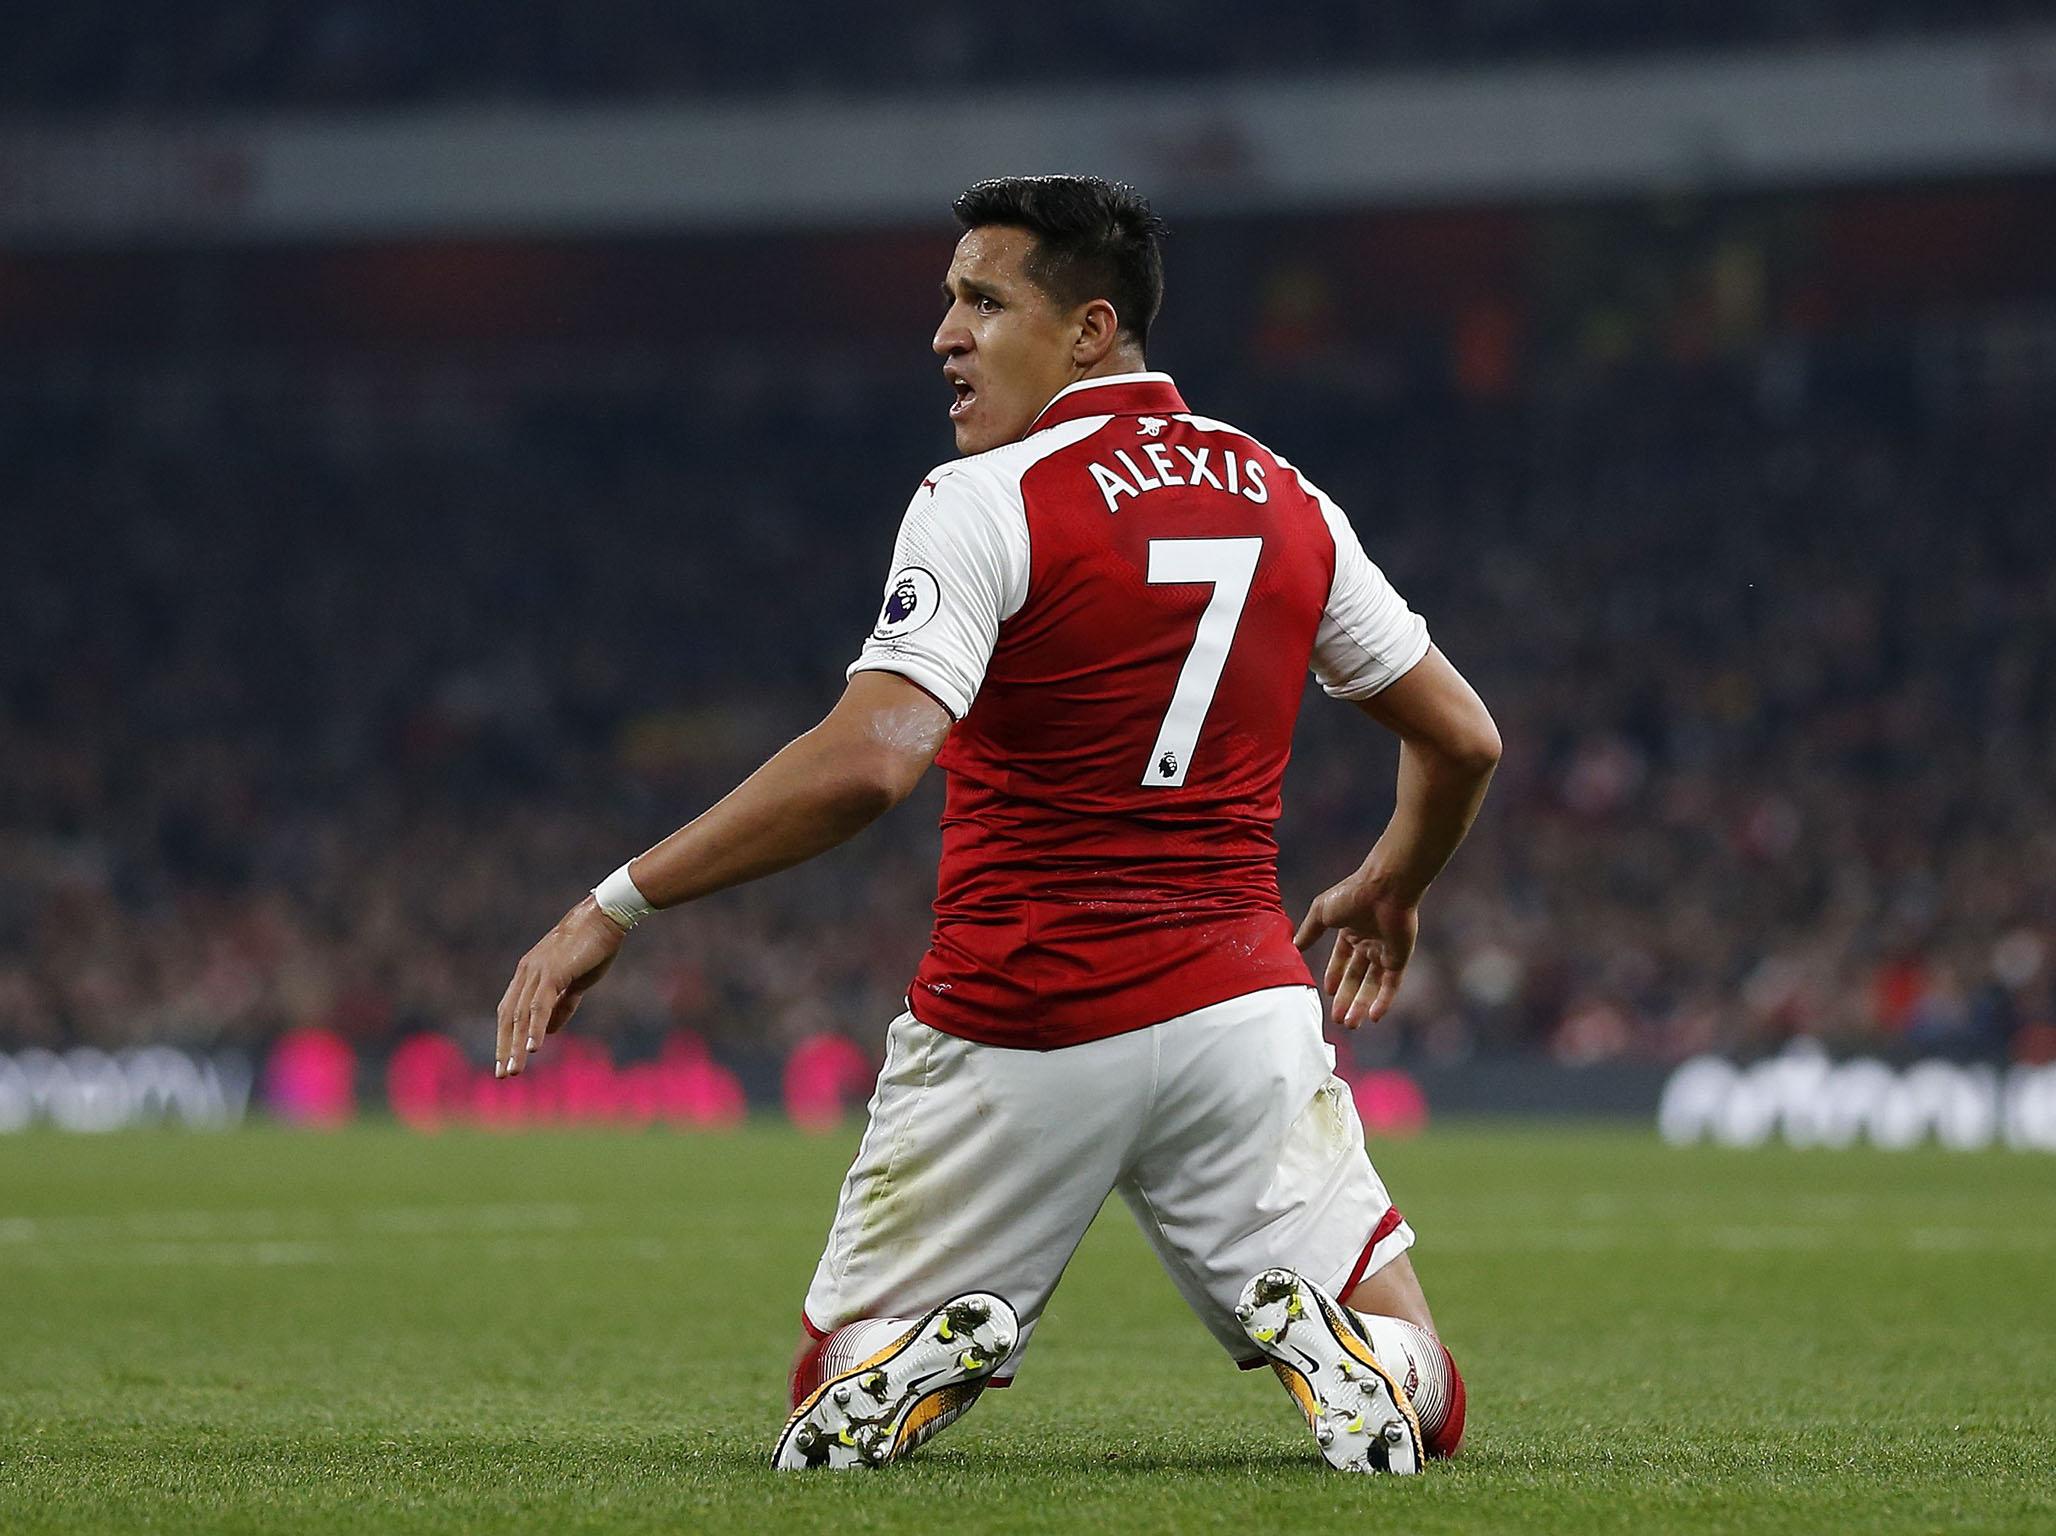 Alexis was in typically dangerous form